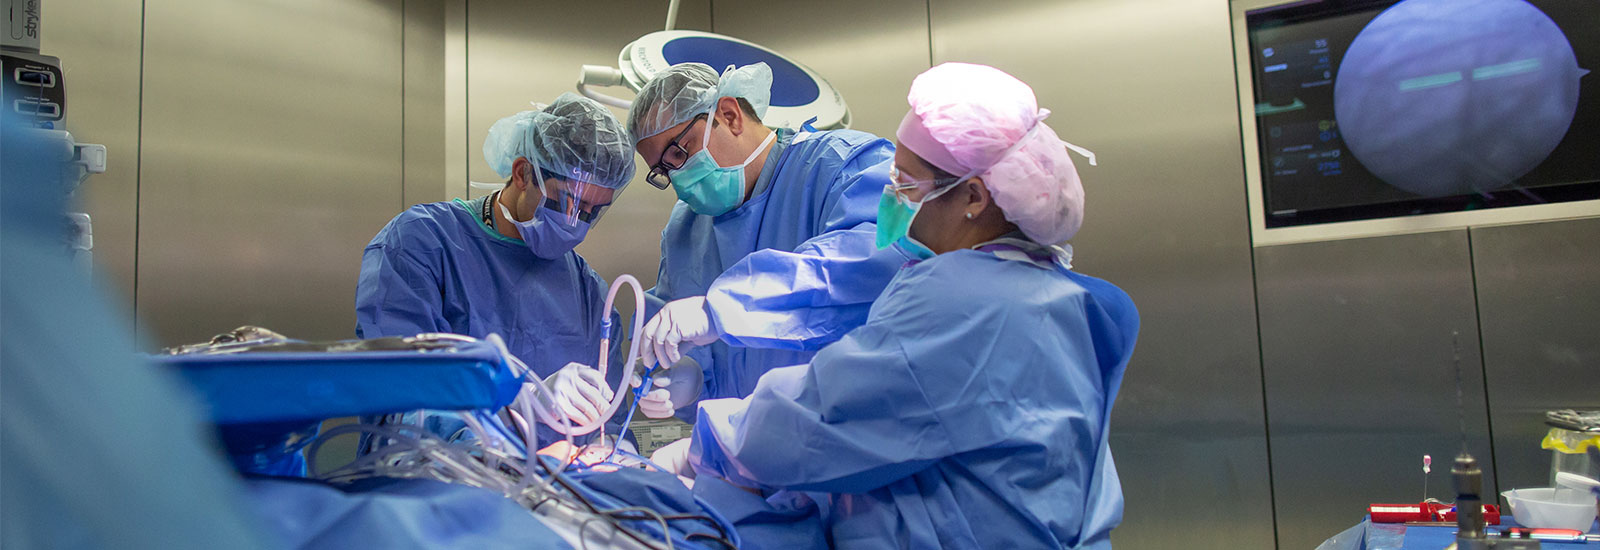 Physicians at the Lennar Foundation Medical Center perform an ACL repair surgery